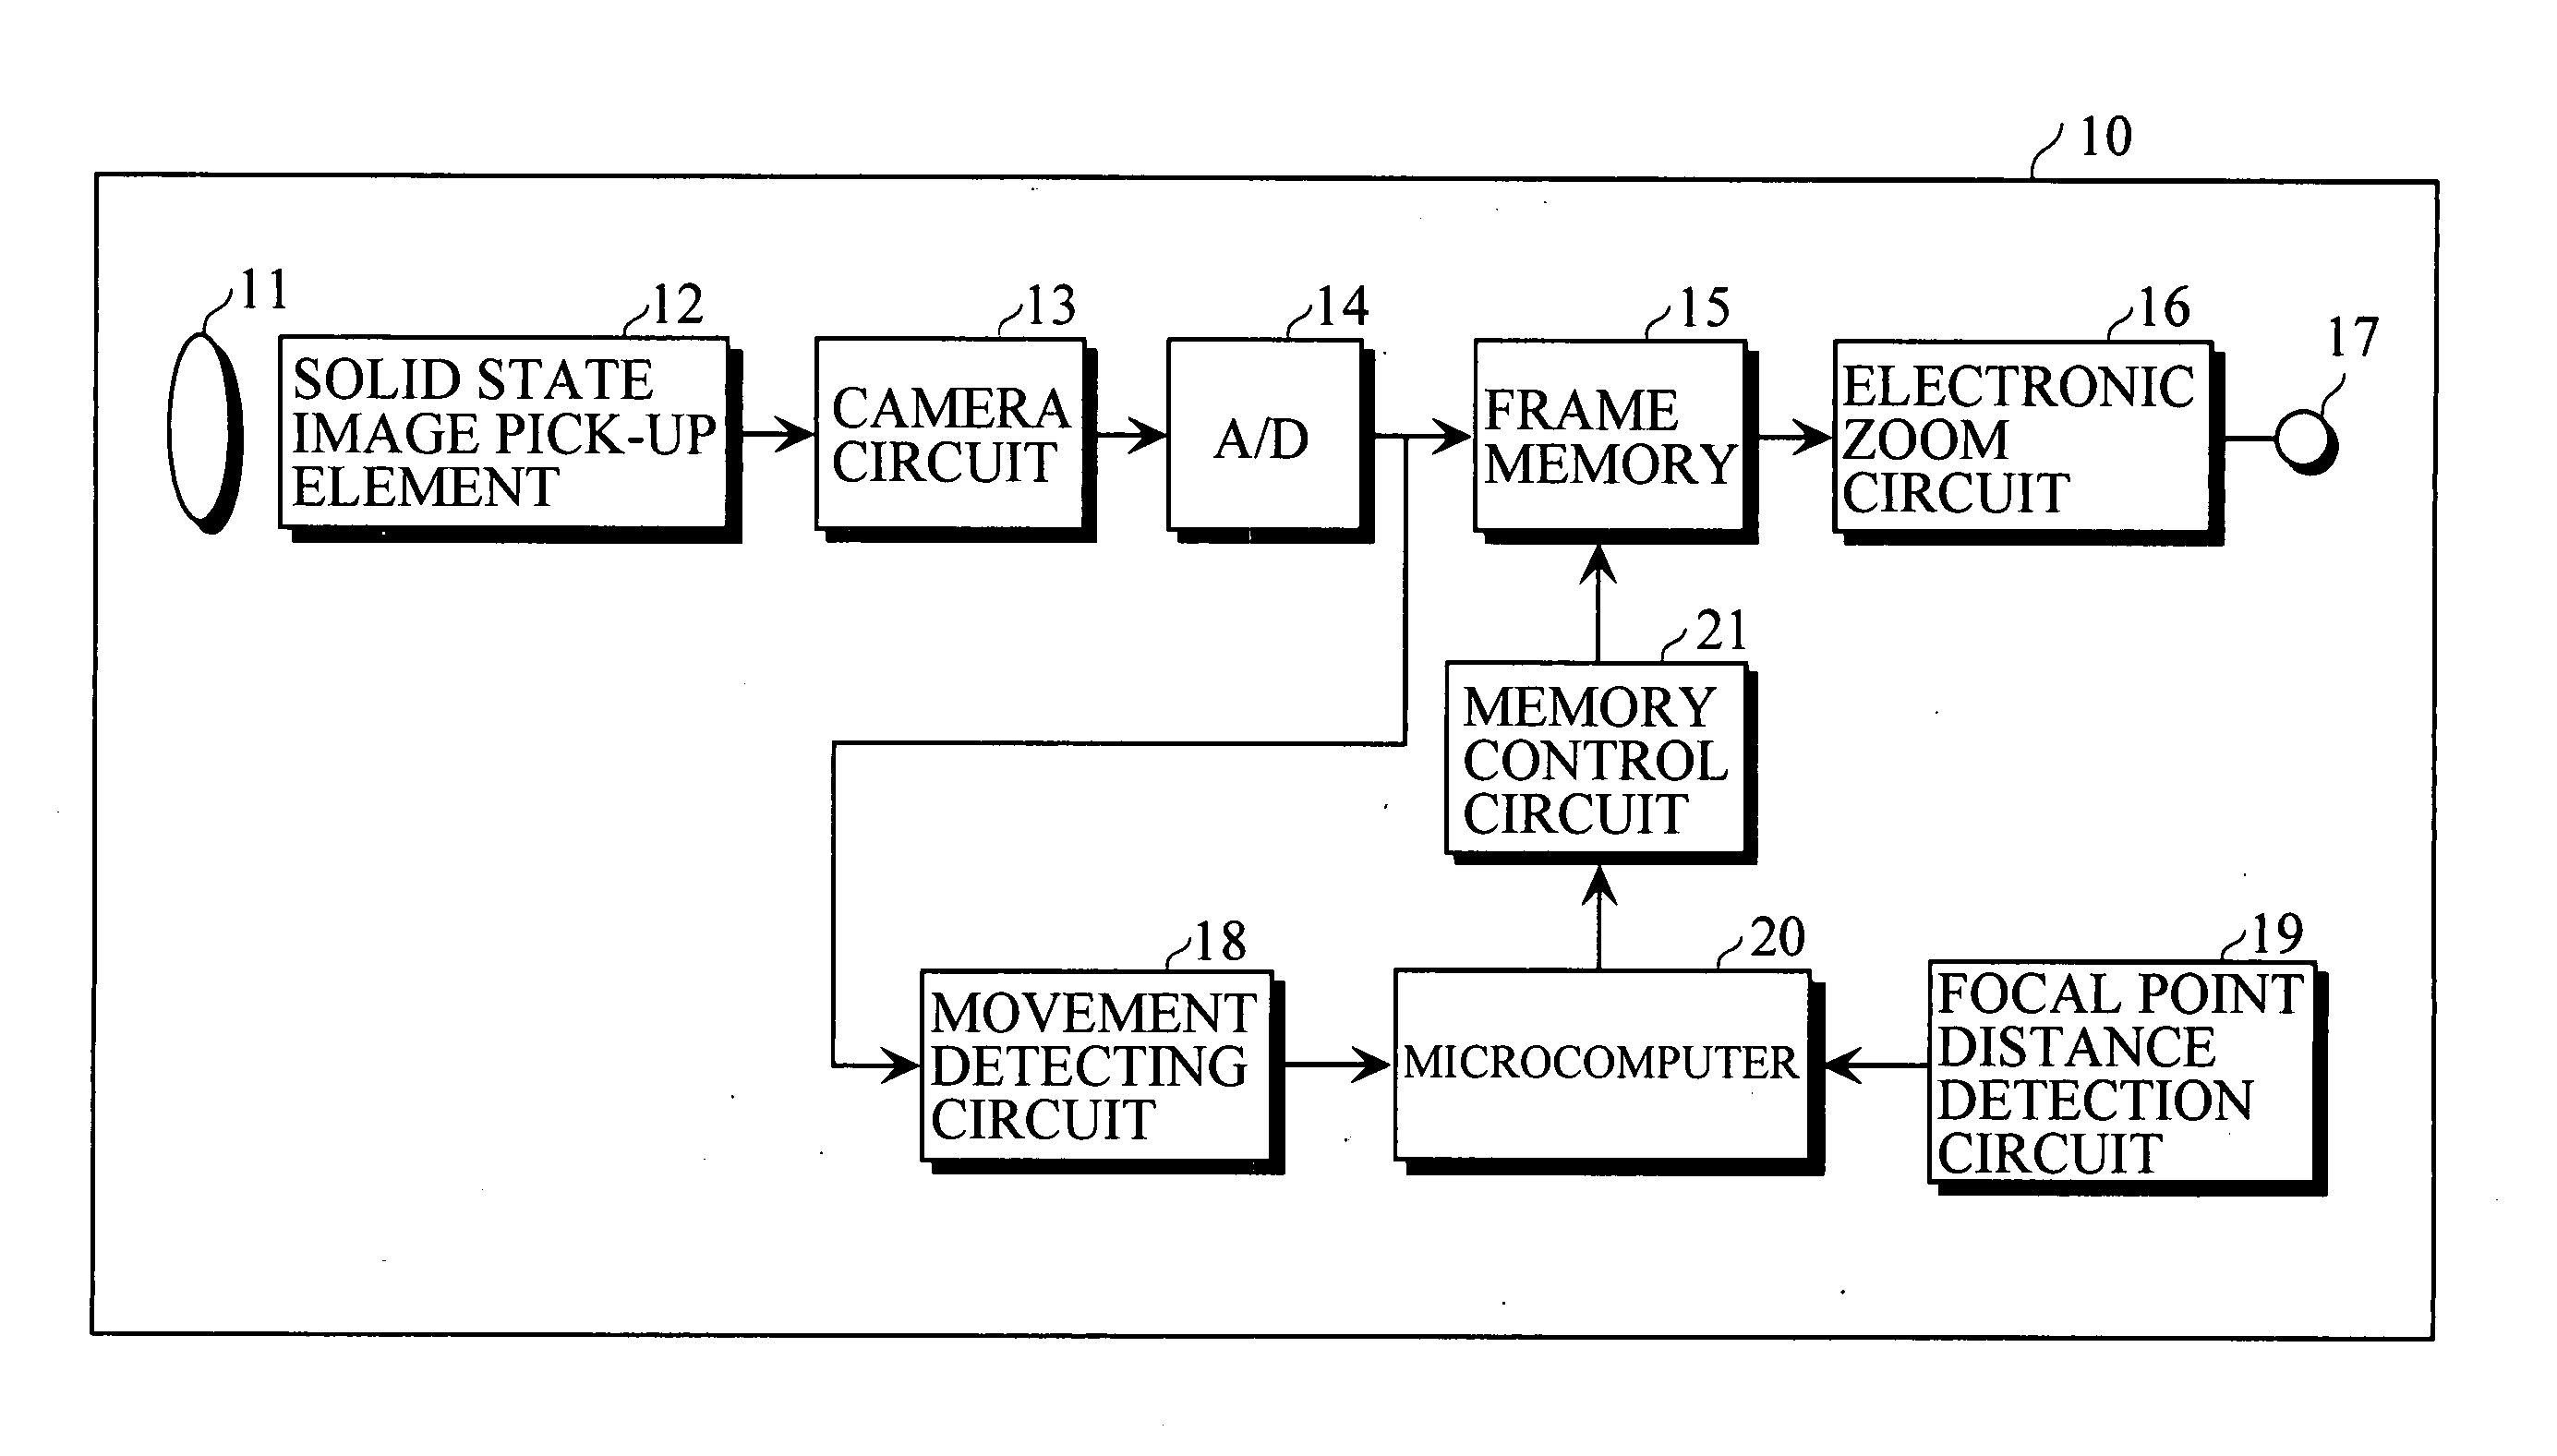 Unintentional hand movement canceling device and imaging apparatus